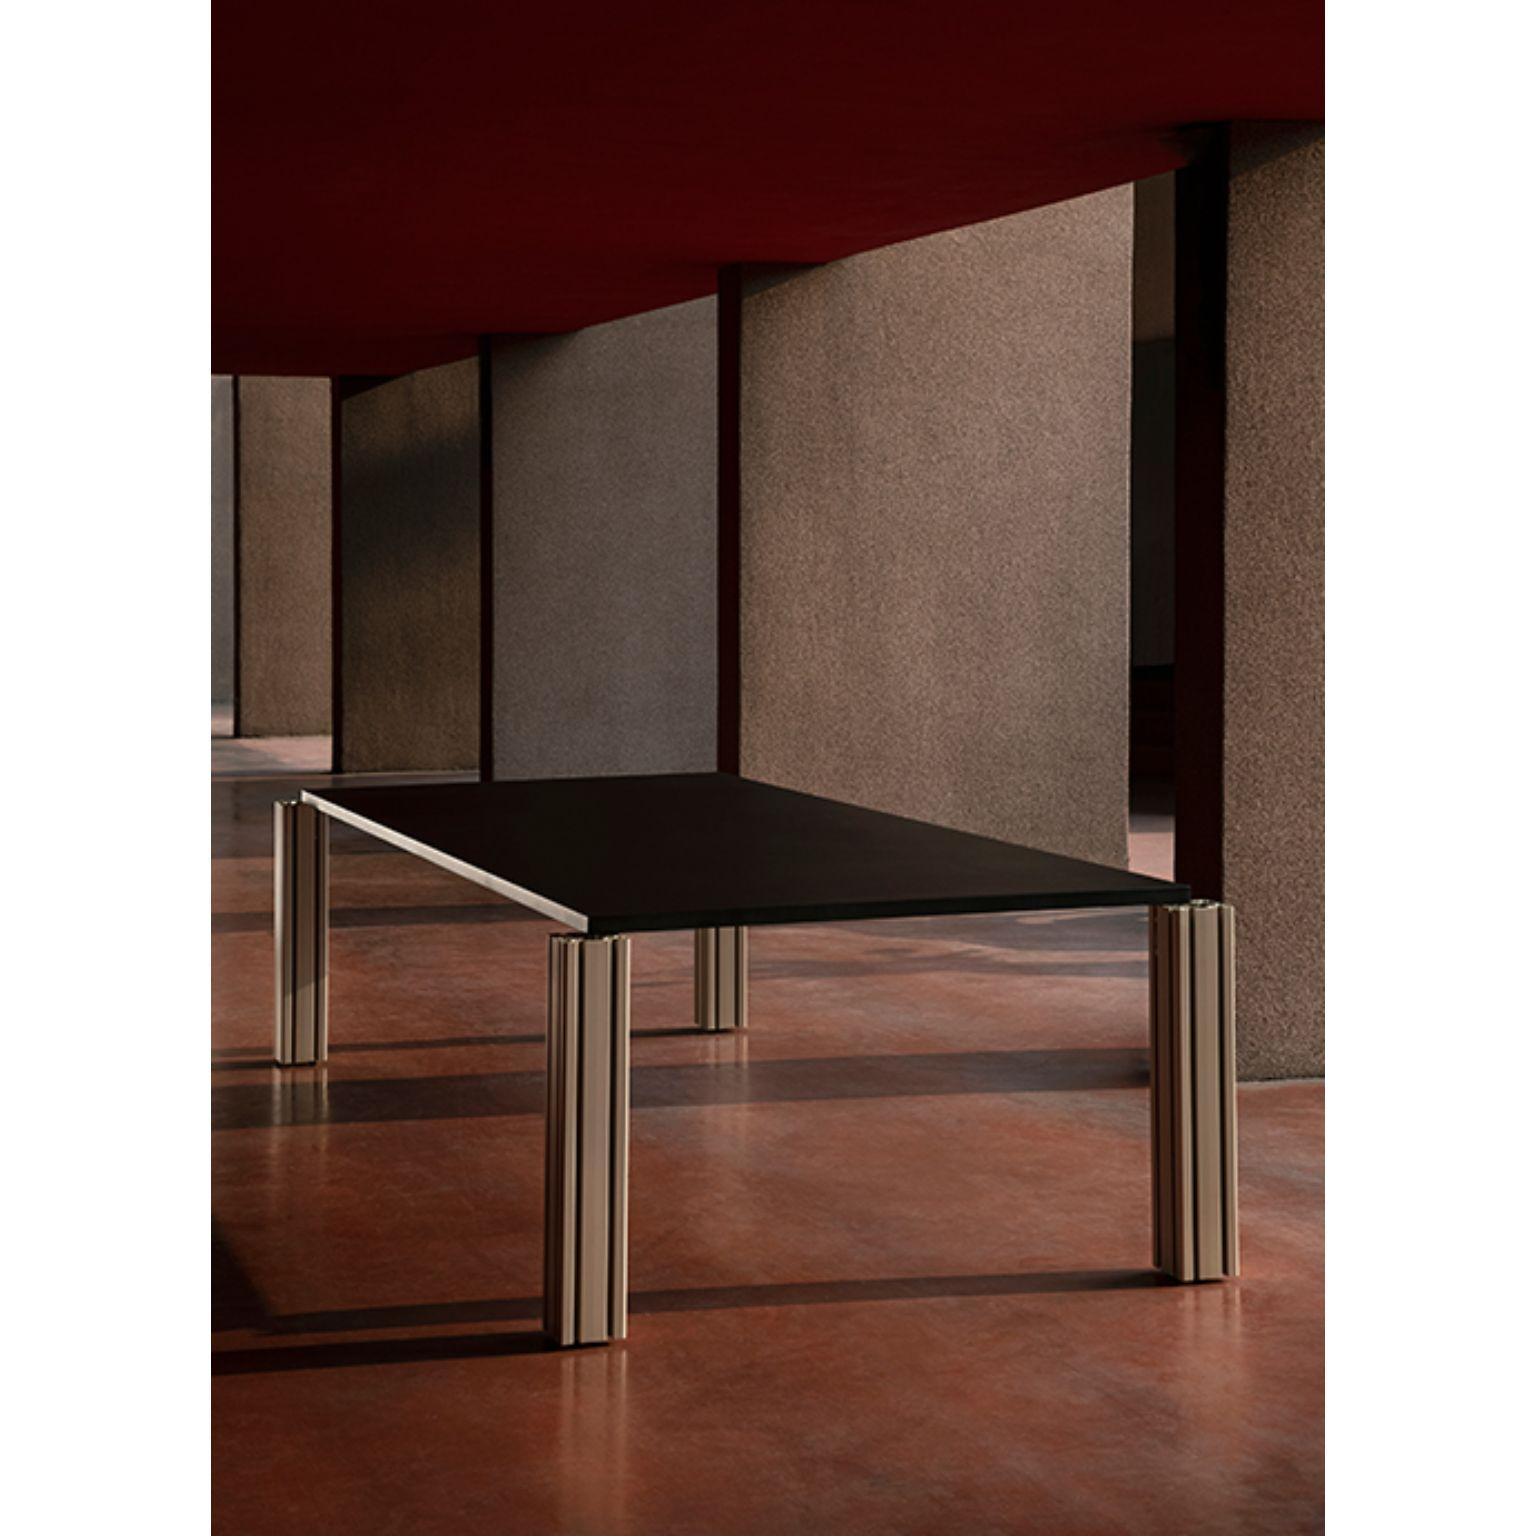 Work extruded table by Ben Gorham
Materials: Top: Antracite/Nero Ferro/Nero Rt 9822/ Peltro metal and Concrete
 Structure: Champagne extruded anodized aluminium
Dimensions: W 292 x D 132 x H 72.2 cm

Work Extruded is a table whose design is